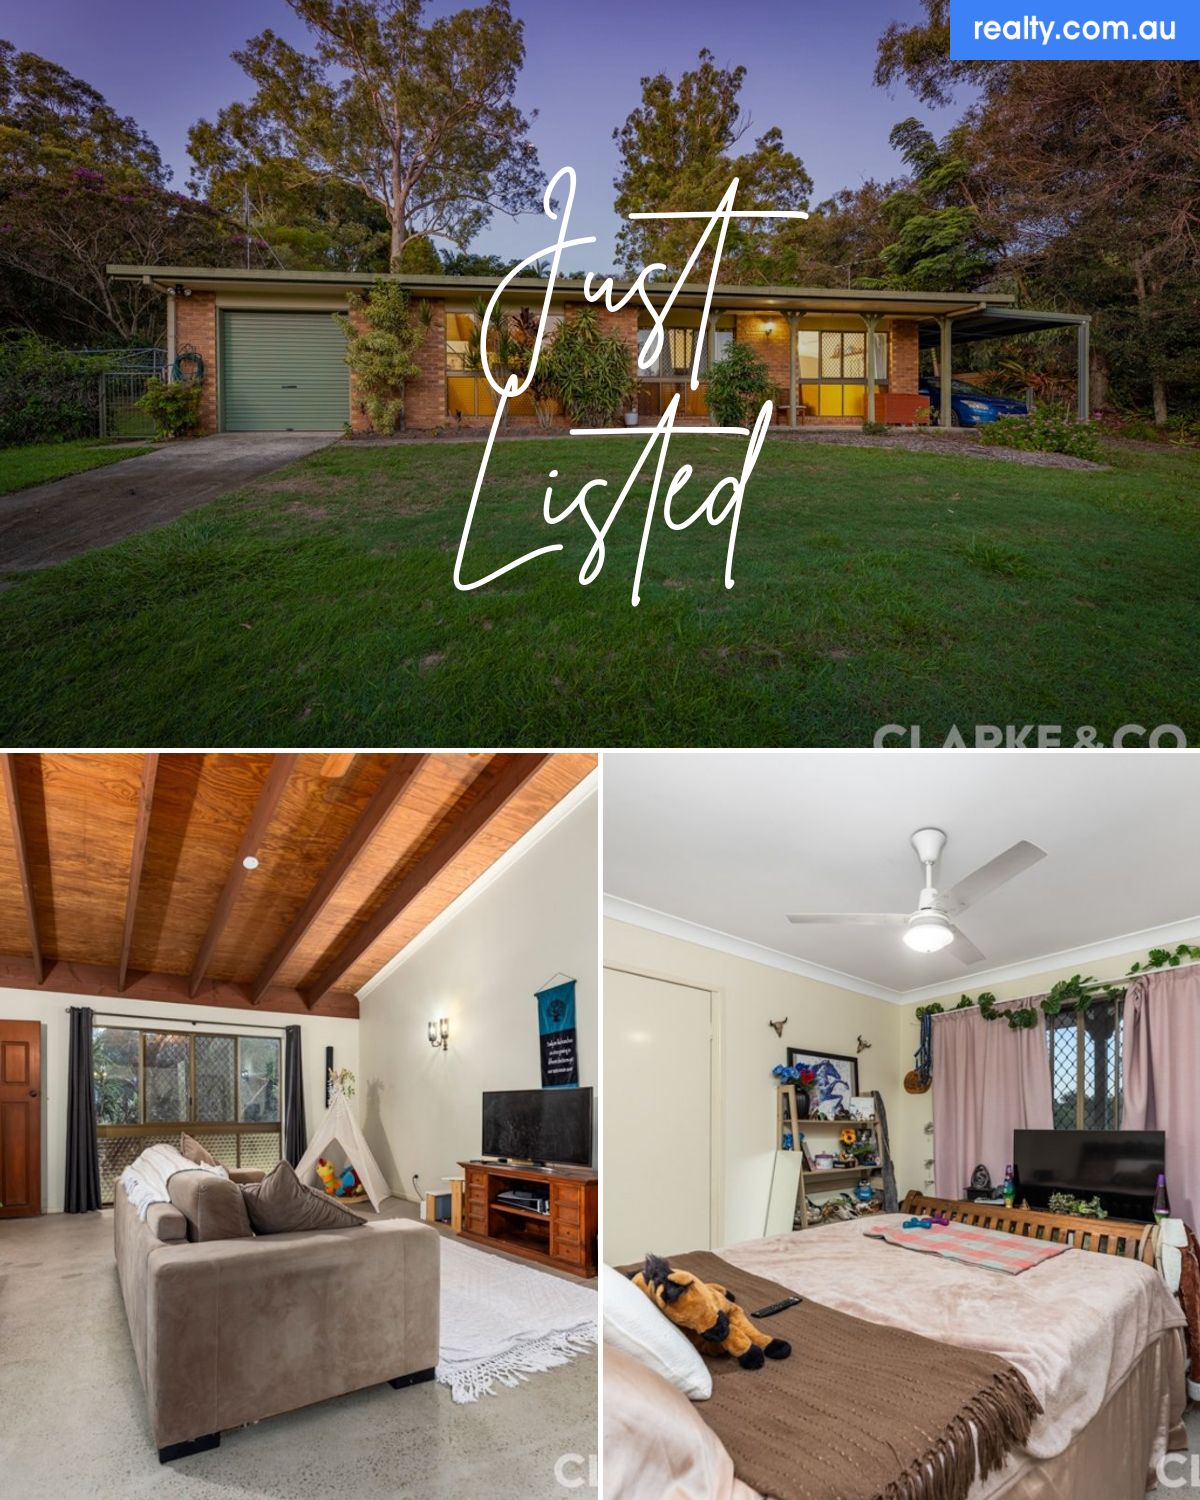 1 Littles Road, Glass House Mountains, QLD 4518 | Realty.com.au